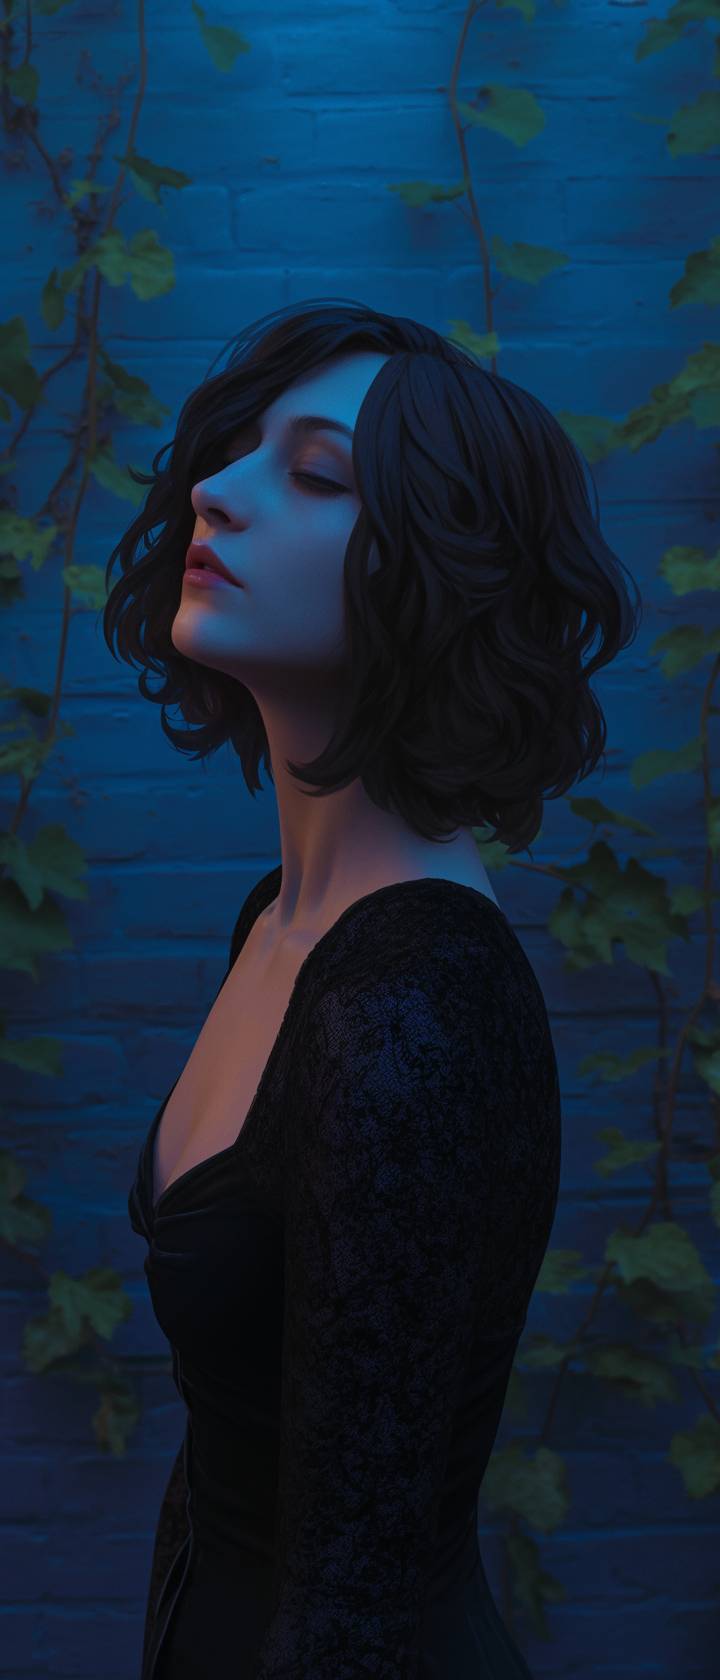 Brunette woman facing the camera against a brick wall with ivy at night, wearing a black dress, with blue lighting and touches of green and soft purple, creating a sad atmosphere evoking nostalgia